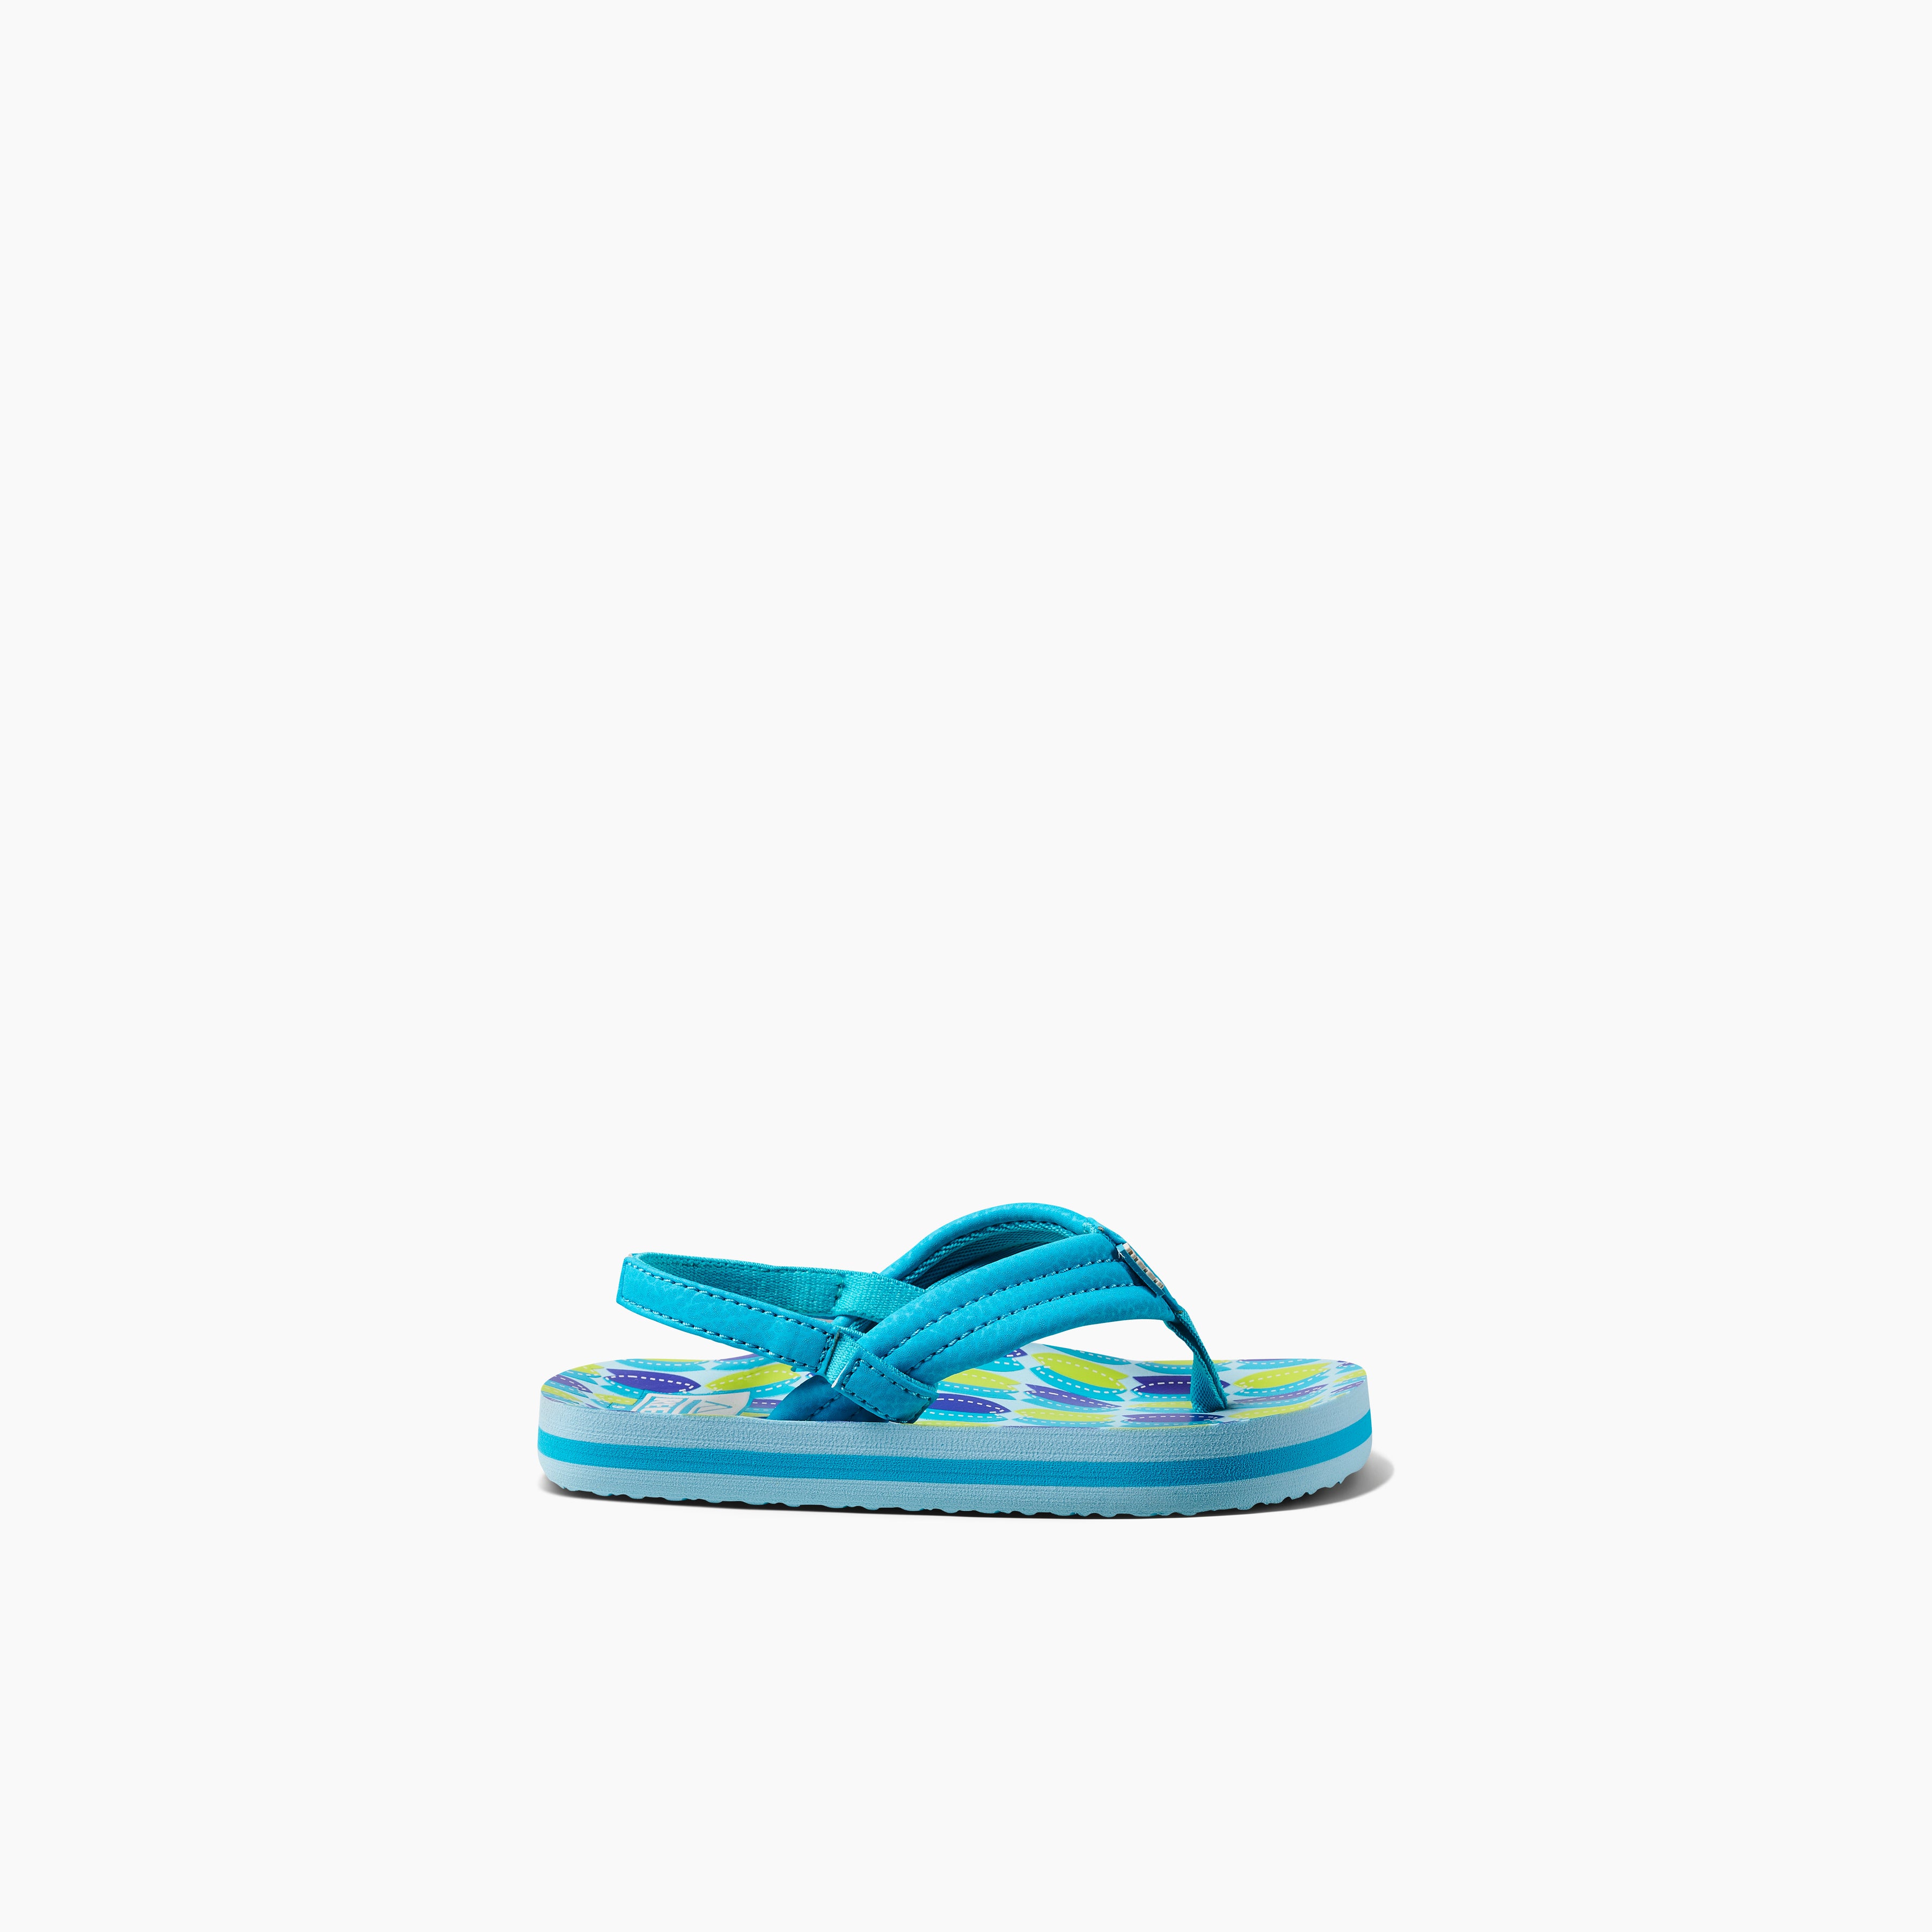 Boy's Little Ahi Sandals in Blue Fish side view